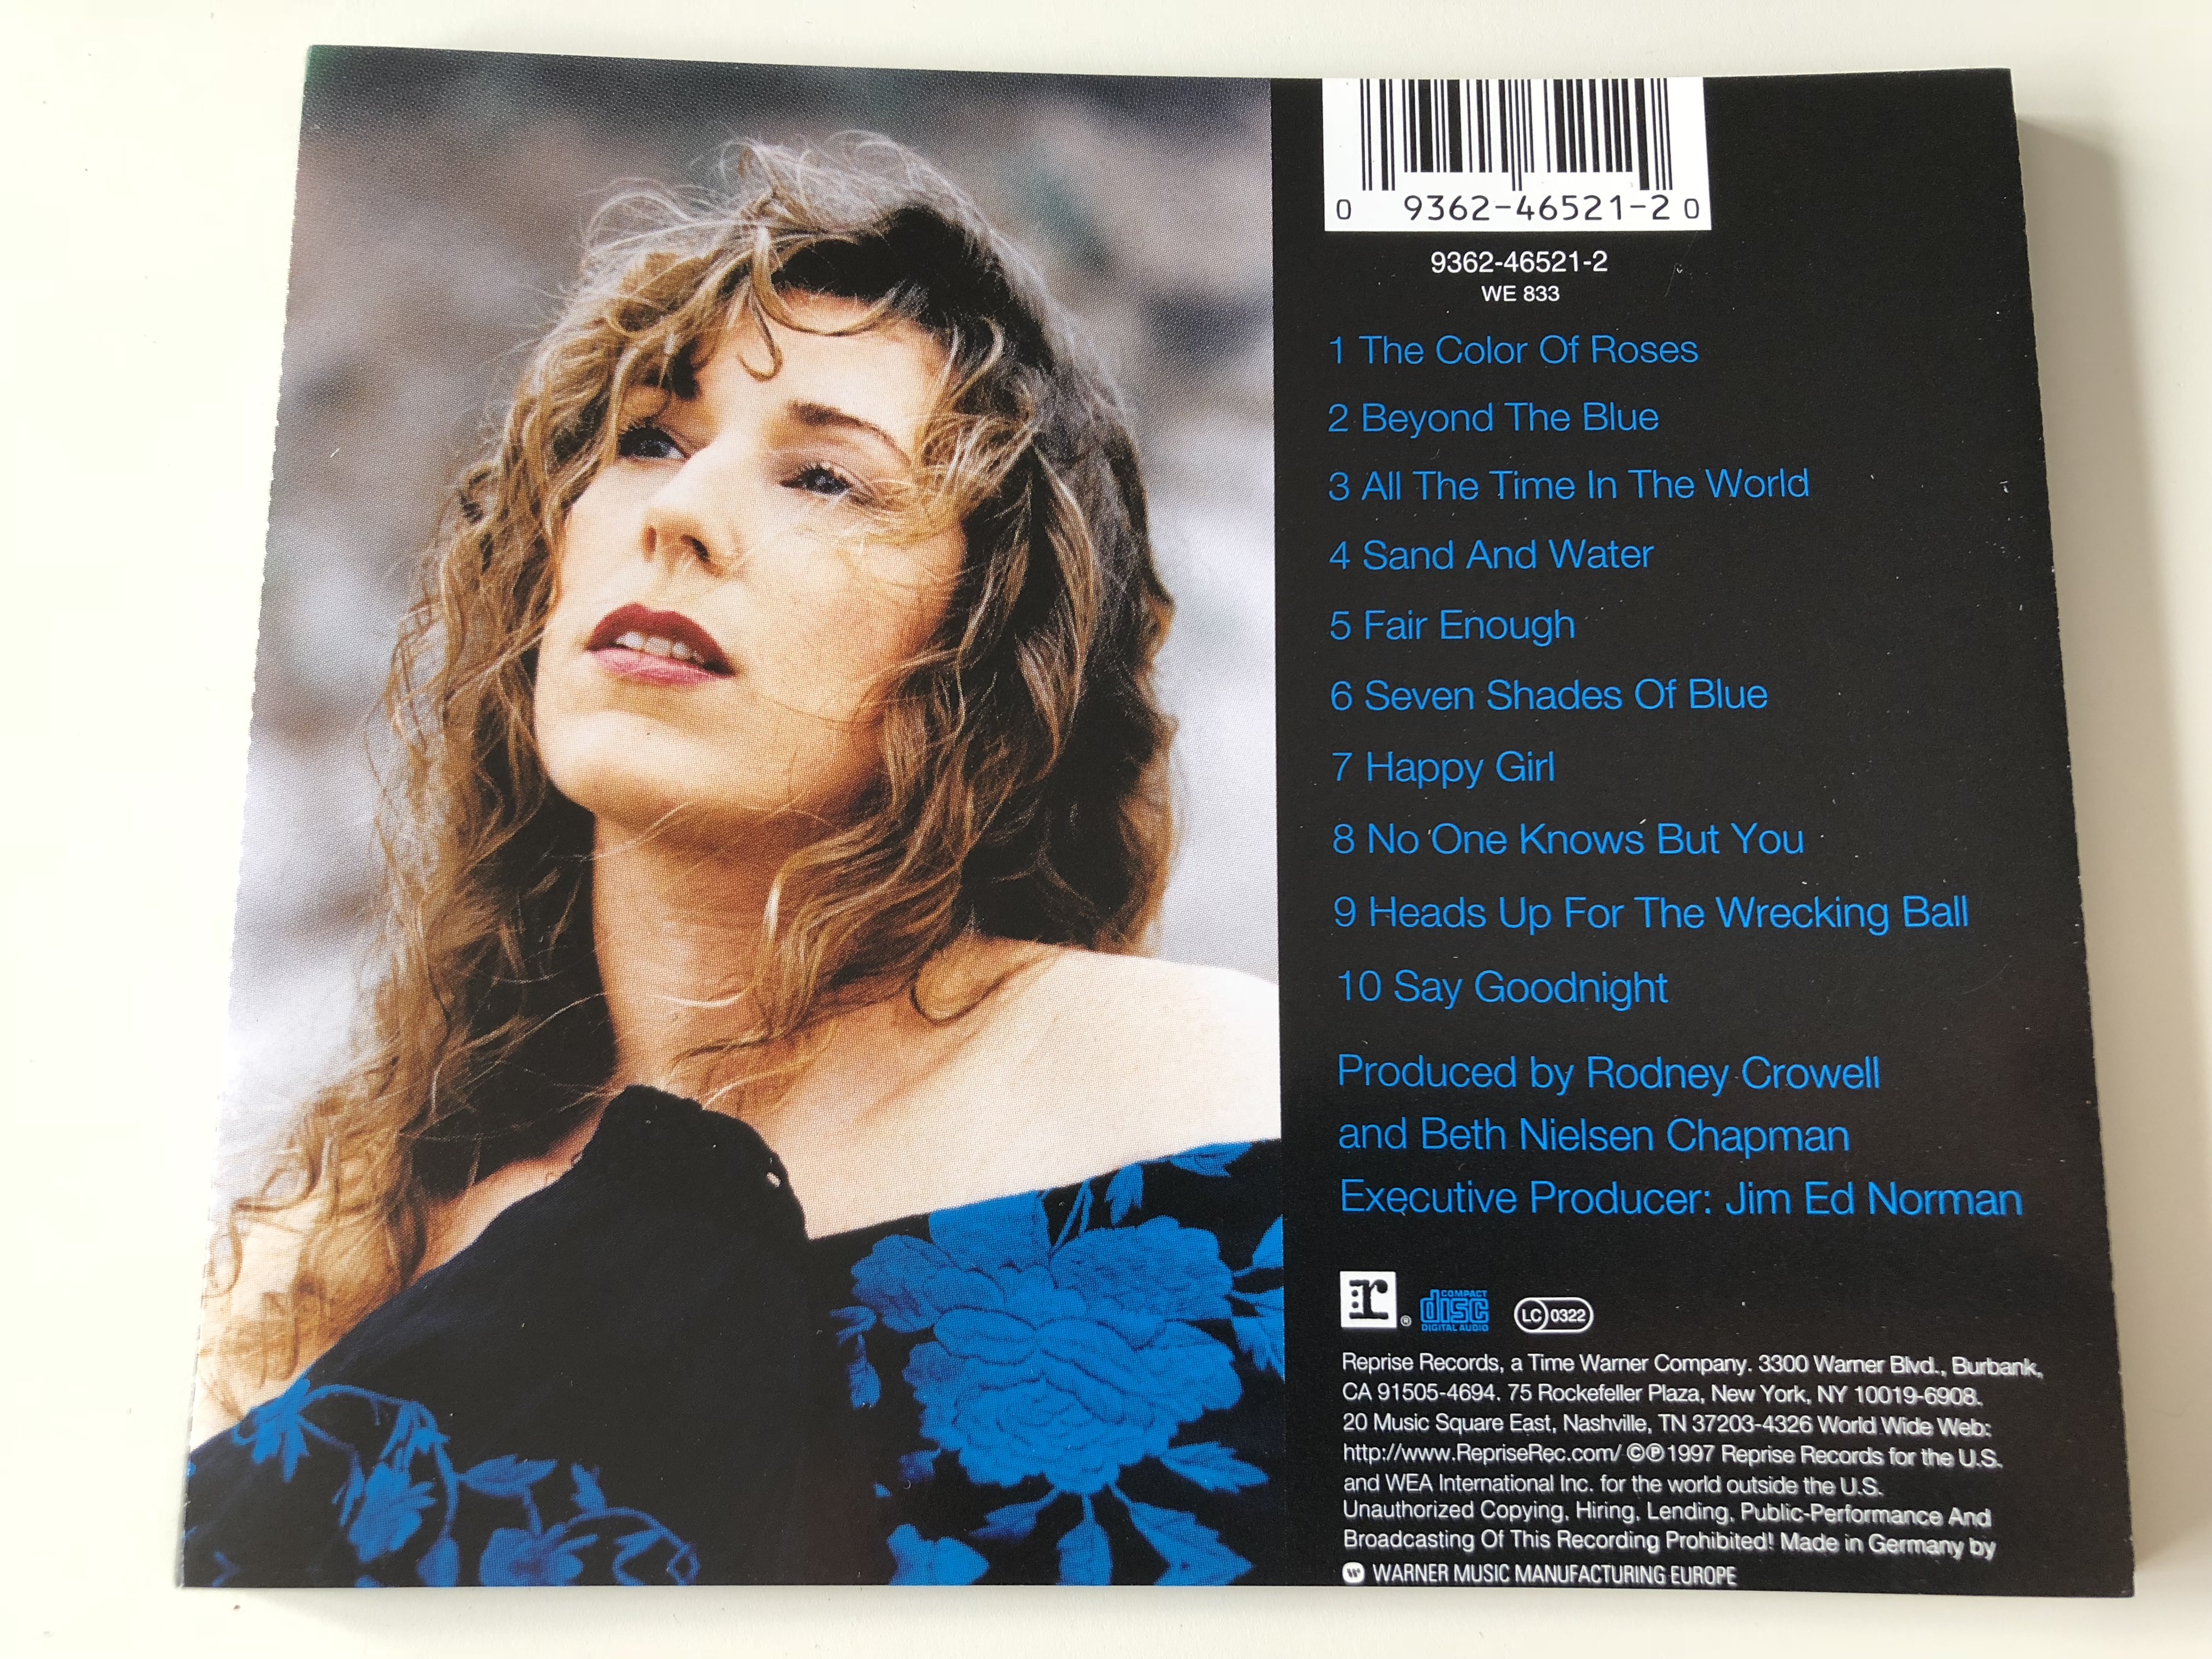 Beth Nielsen Chapman - sand and water / Audio CD 1997 / American singer and  songwriter